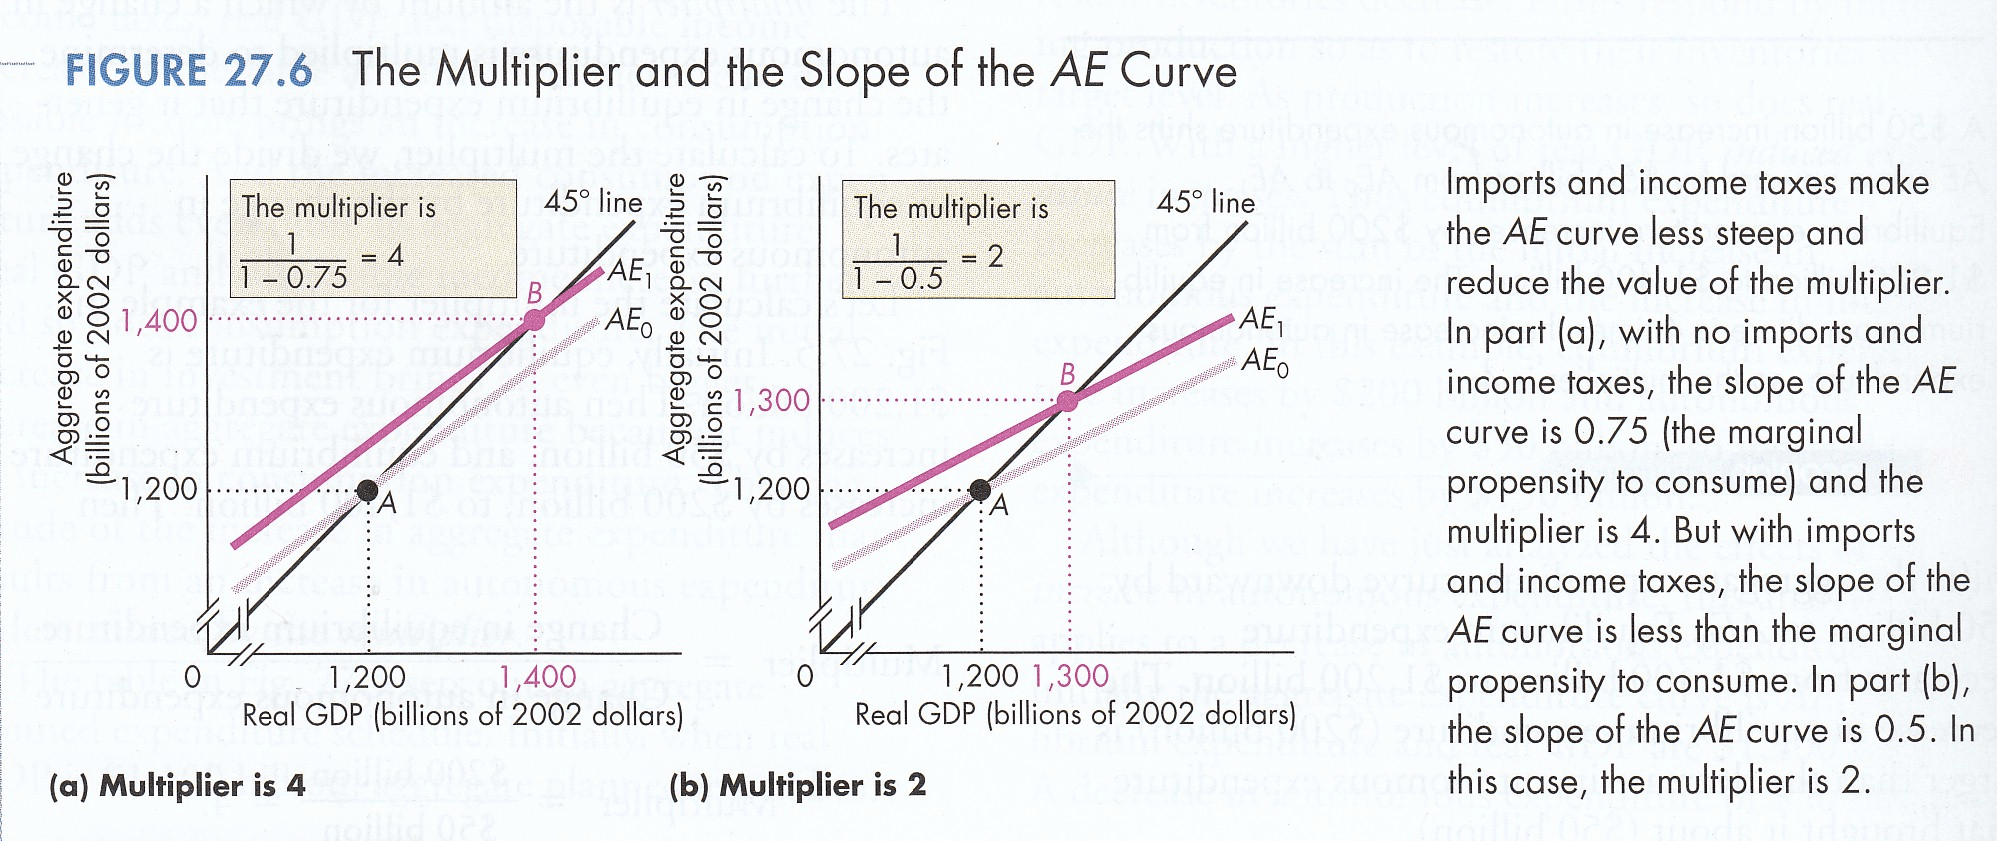 FIGURE 27.6 The Multiplier and the Slope of the AE Curve ,200 The
multiplier is I -0.75 ,400 ,200 I ,200 450 line 11400 Q) CN The
multiplier is -2 -0.5 ,300 line AEI Real GDP (billions of 2002
dollars) 1,200 1,300 Real GDP (billions of 2002 dollars) (a)
Multiplier is 4 (b) Multiplier is 2 Imports and income taxes make the
AE curve less steep and reduce the value of the multiplier. In part
(a), with no imports and income taxes, the slope of the AE curve is
0.75 (the marginal propensity to consume) and the multiplier is 4. But
with imports and income taxes, the slope of the AE curve is less than
the marginal propensity to consume. In part (b), the slope of the AE
curve is 0.5. In this case, the multiplier is 2.
